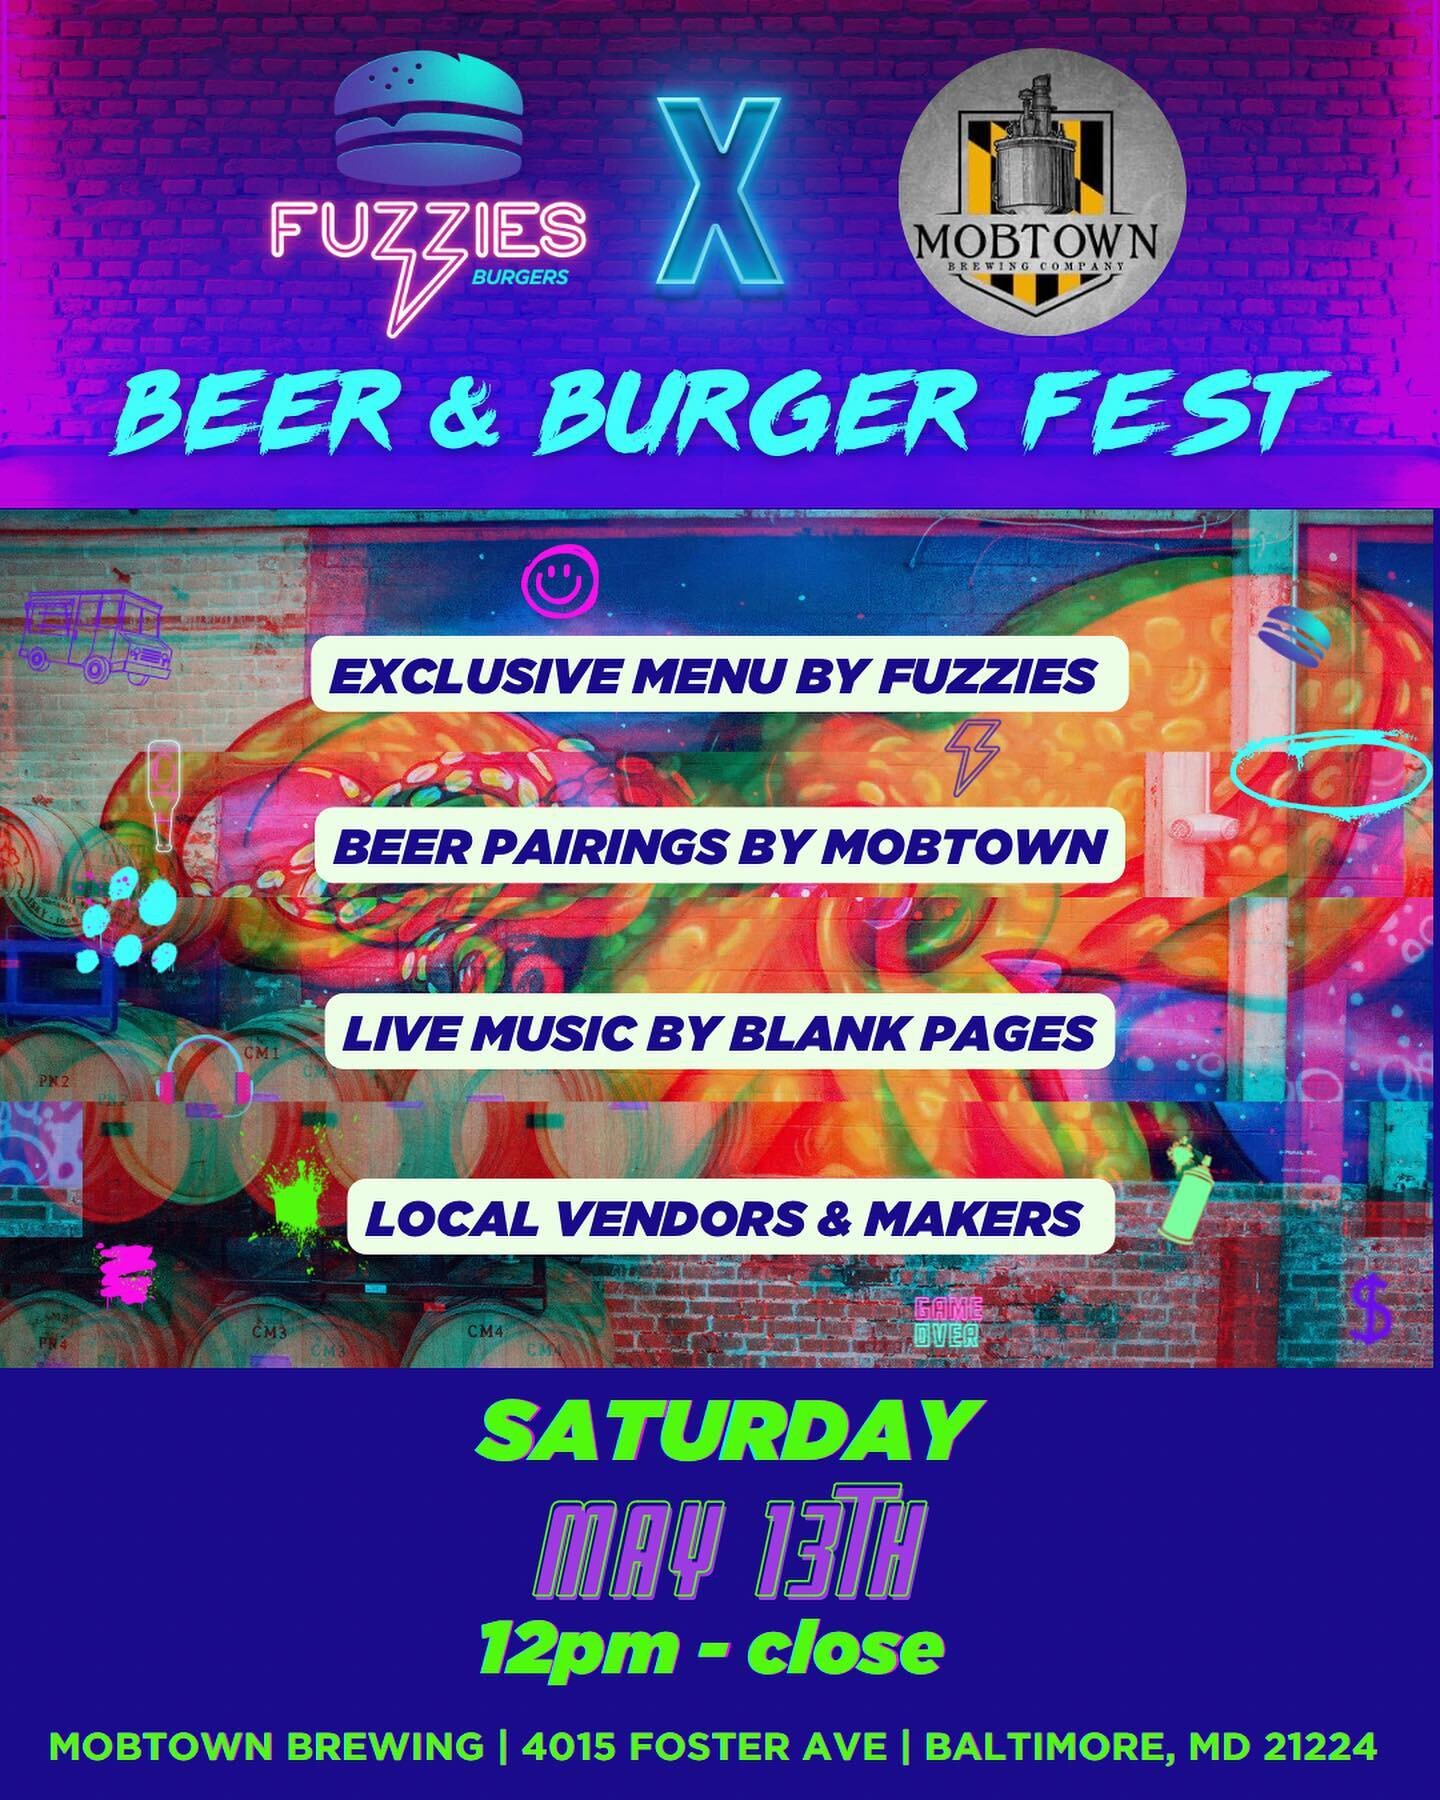 Beer & Burger Fest is BACK. 🙌 We’re shutting down the block this SATURDAY at @mobtownbrewing FUZZIES is rolling out a juicy special menu & Mobtown is pairing up the beers 🍻